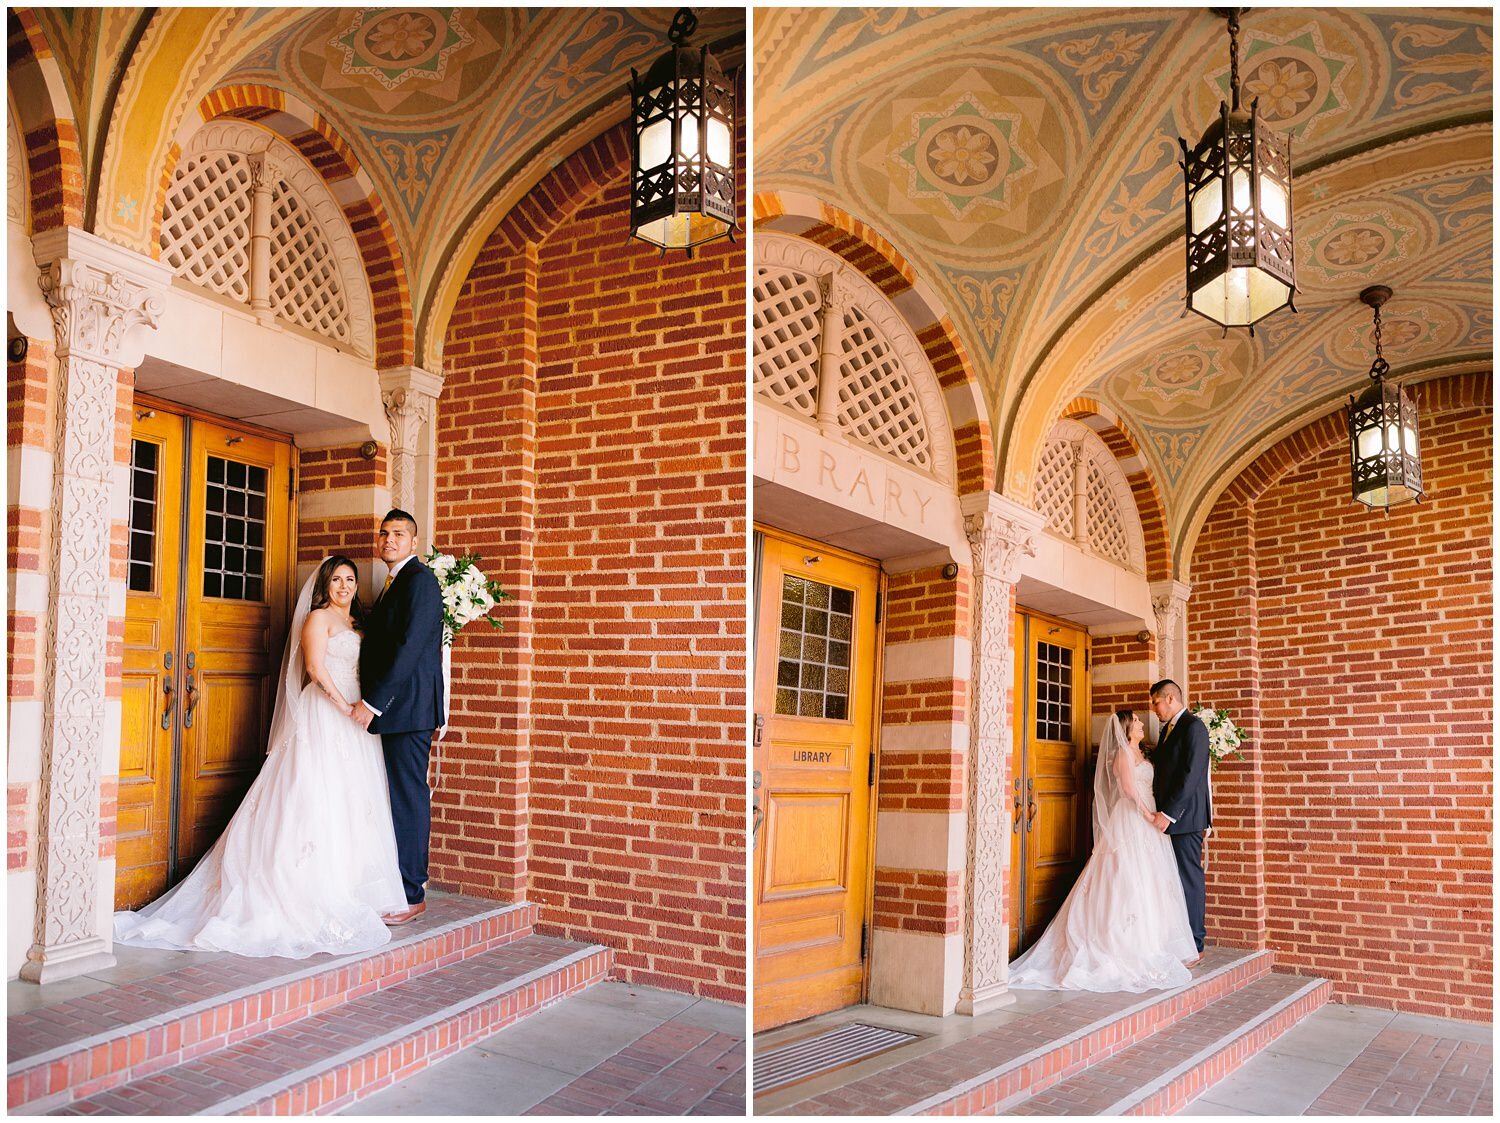 Wedding portraits with bride and groom in front of brick building.